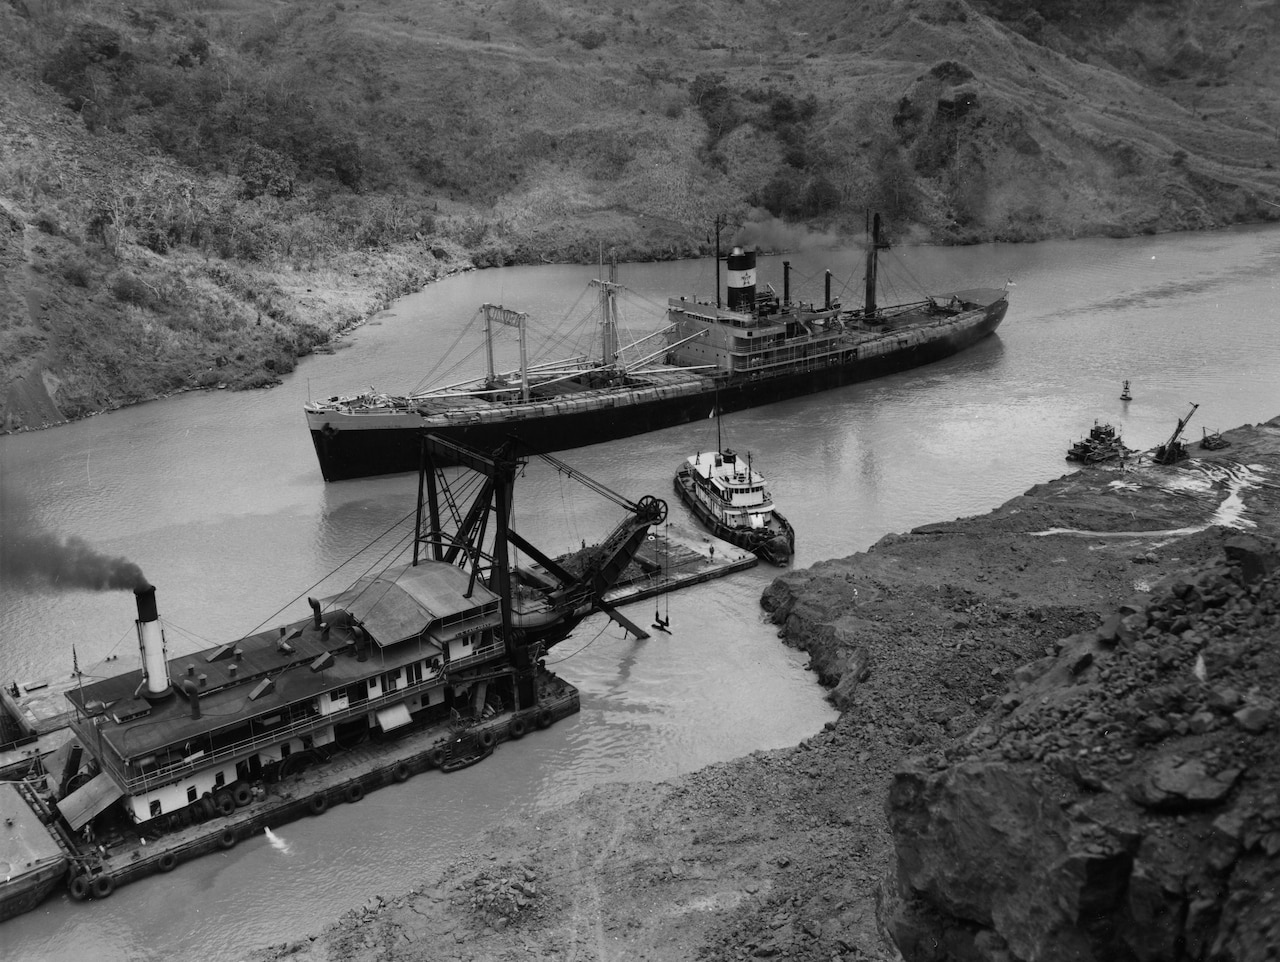 A ship moves through a narrow waterway as another dredging ship attempts to widen the lane.